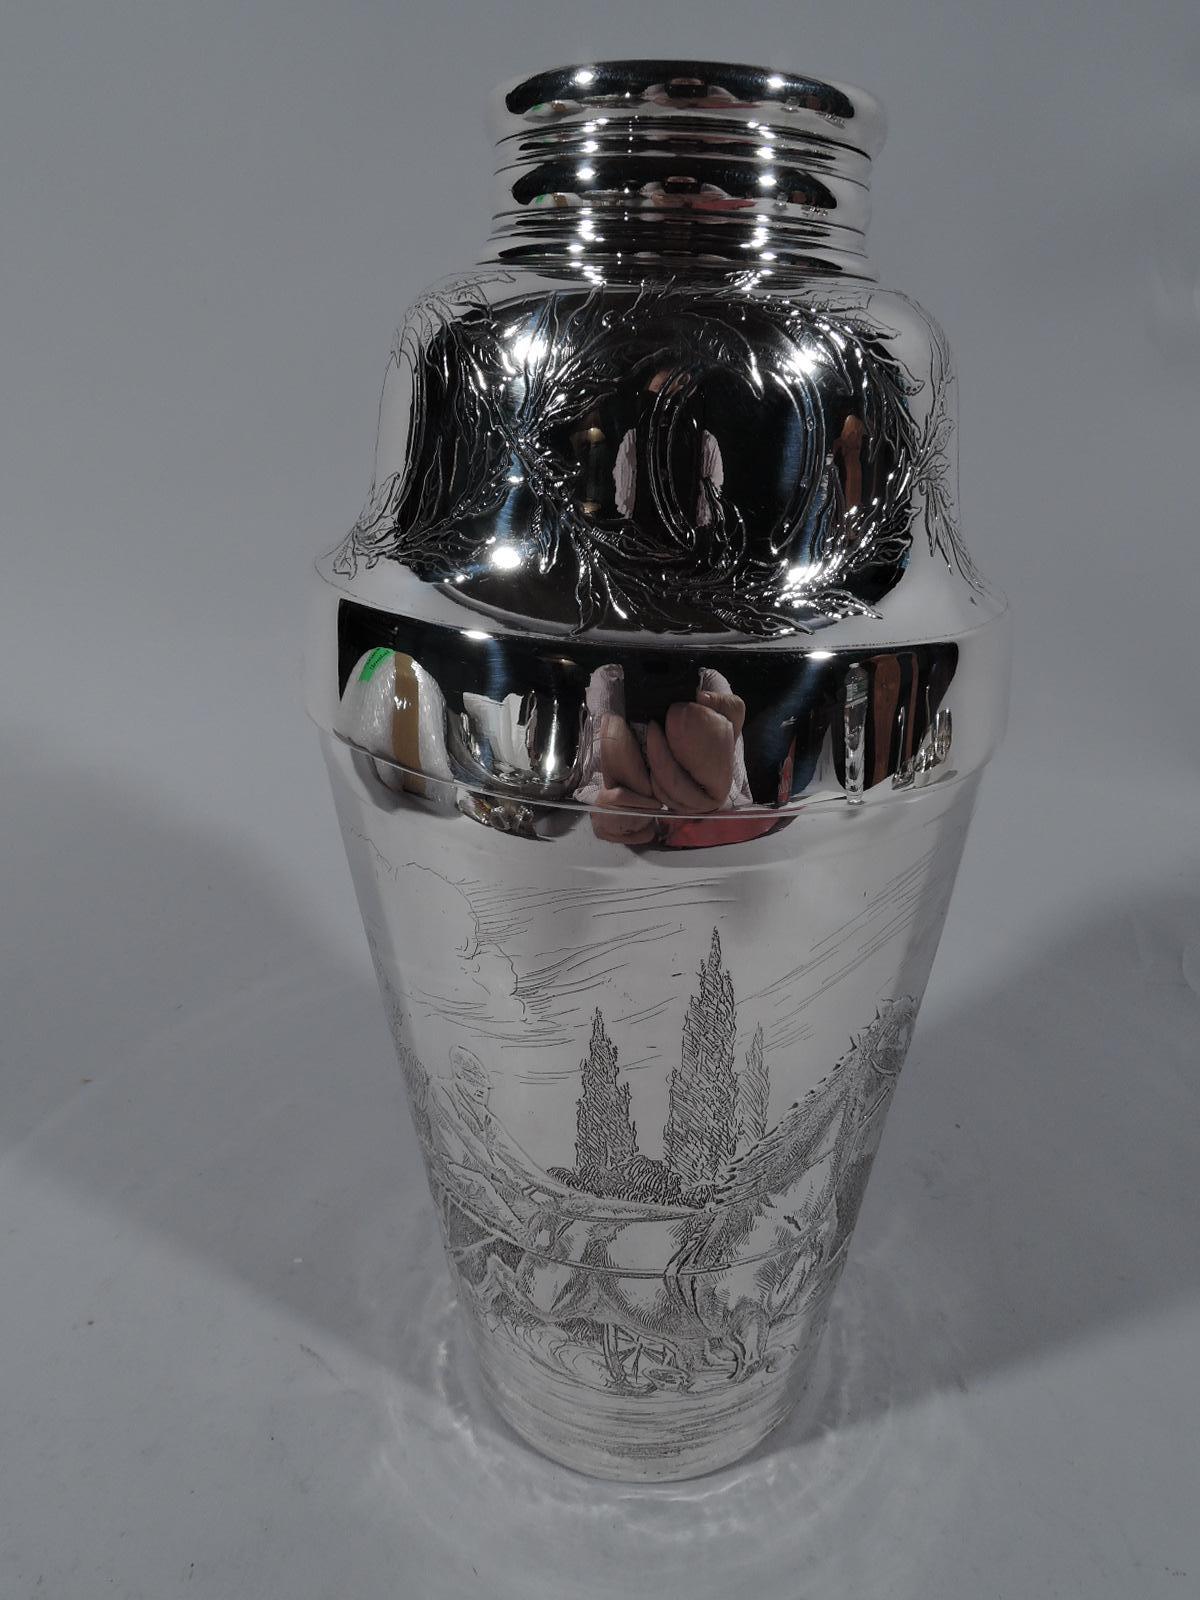 Edwardian sterling silver cocktail shaker. Made by Tiffany & Co. in New York. Tapering cup and detachable domed top with twist spout. Acid-etched ornament: On cup a carriage race between two sulkies (one-person vehicles). On top interlaced branches